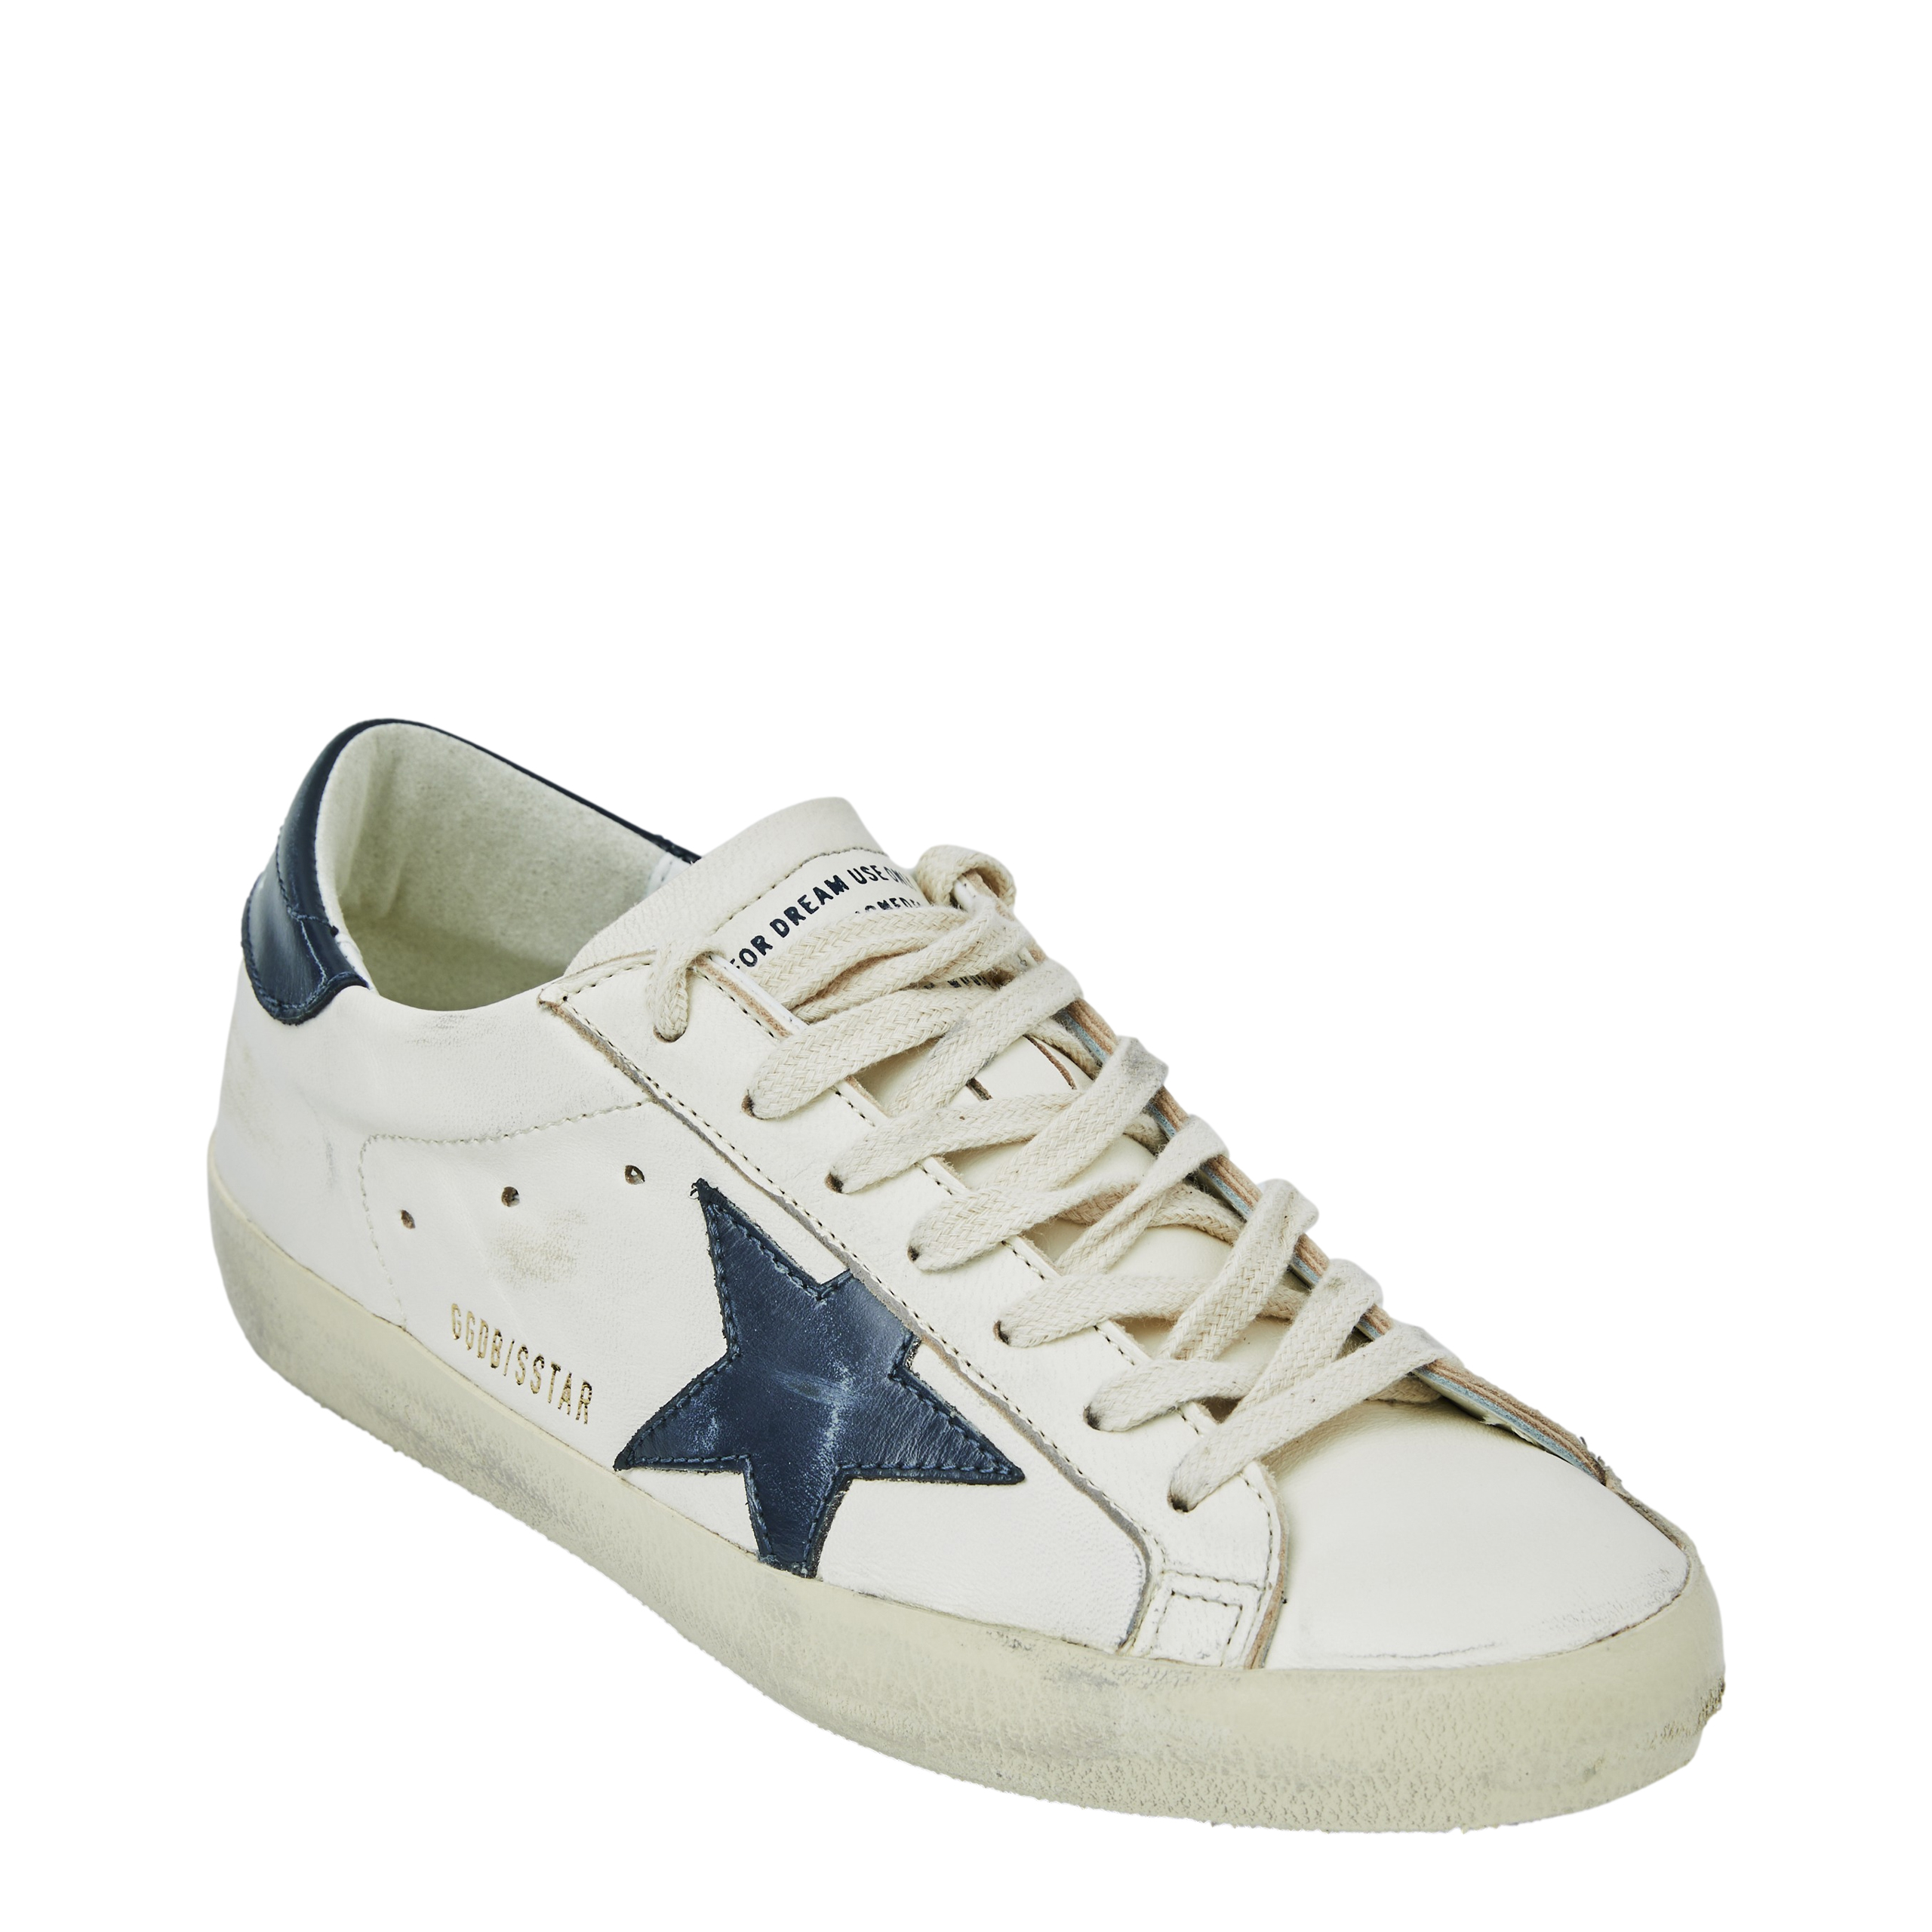 None Golden Goose Deluxe Brand GMF00101/F004164/15430, размер 39;40;41;45